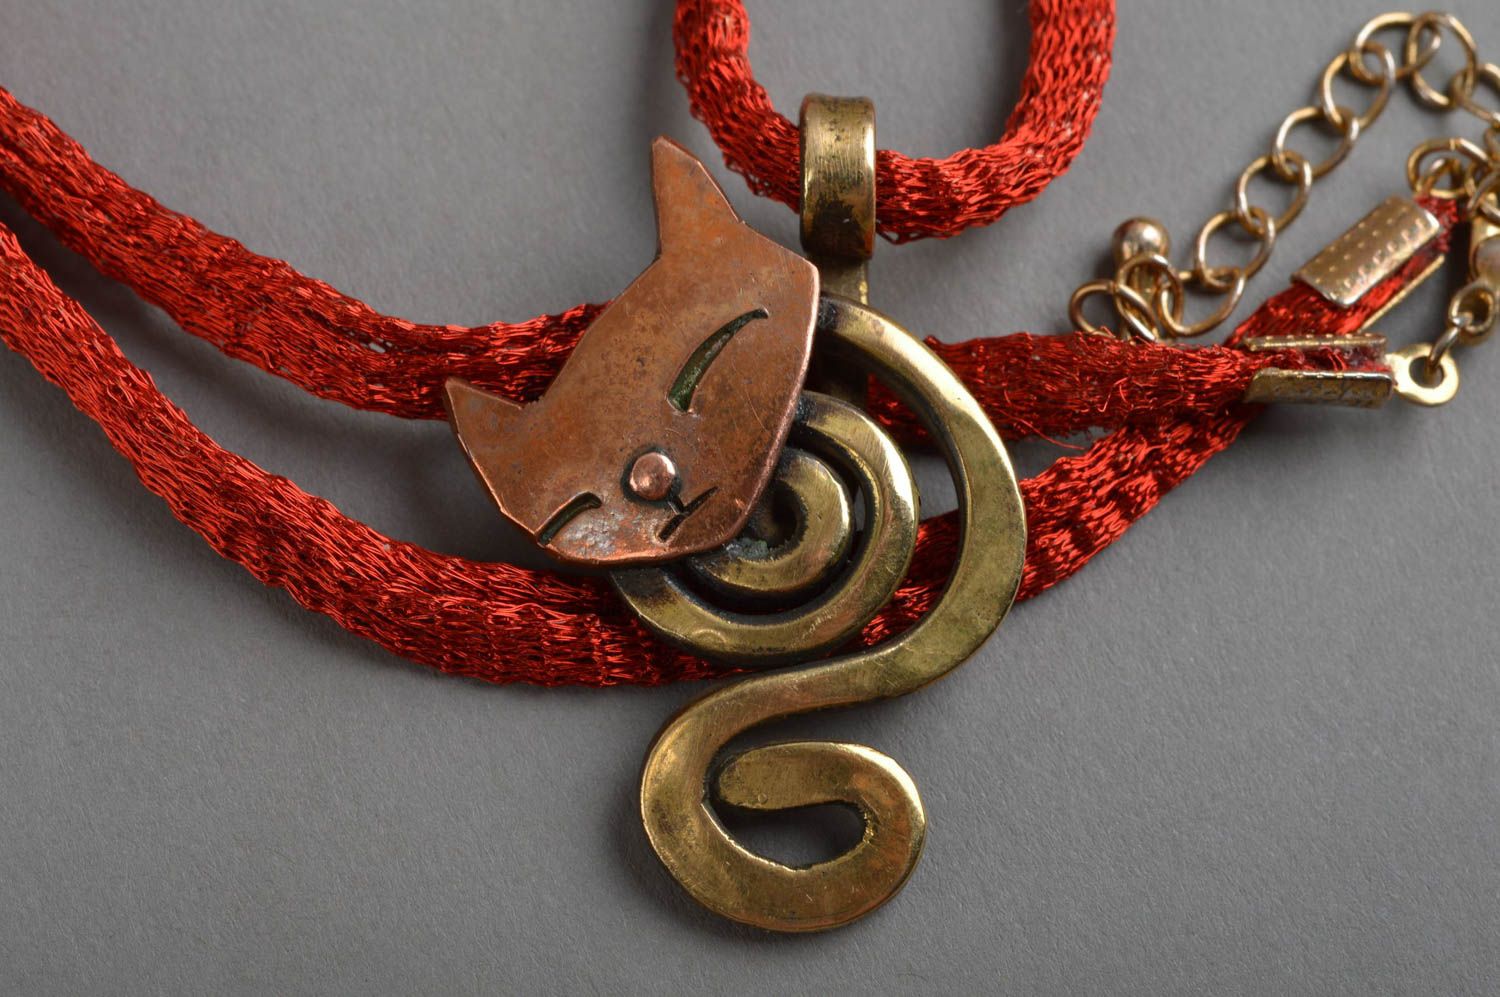 Handmade pendant in shape of cat made of brass using forging technique on lace photo 3